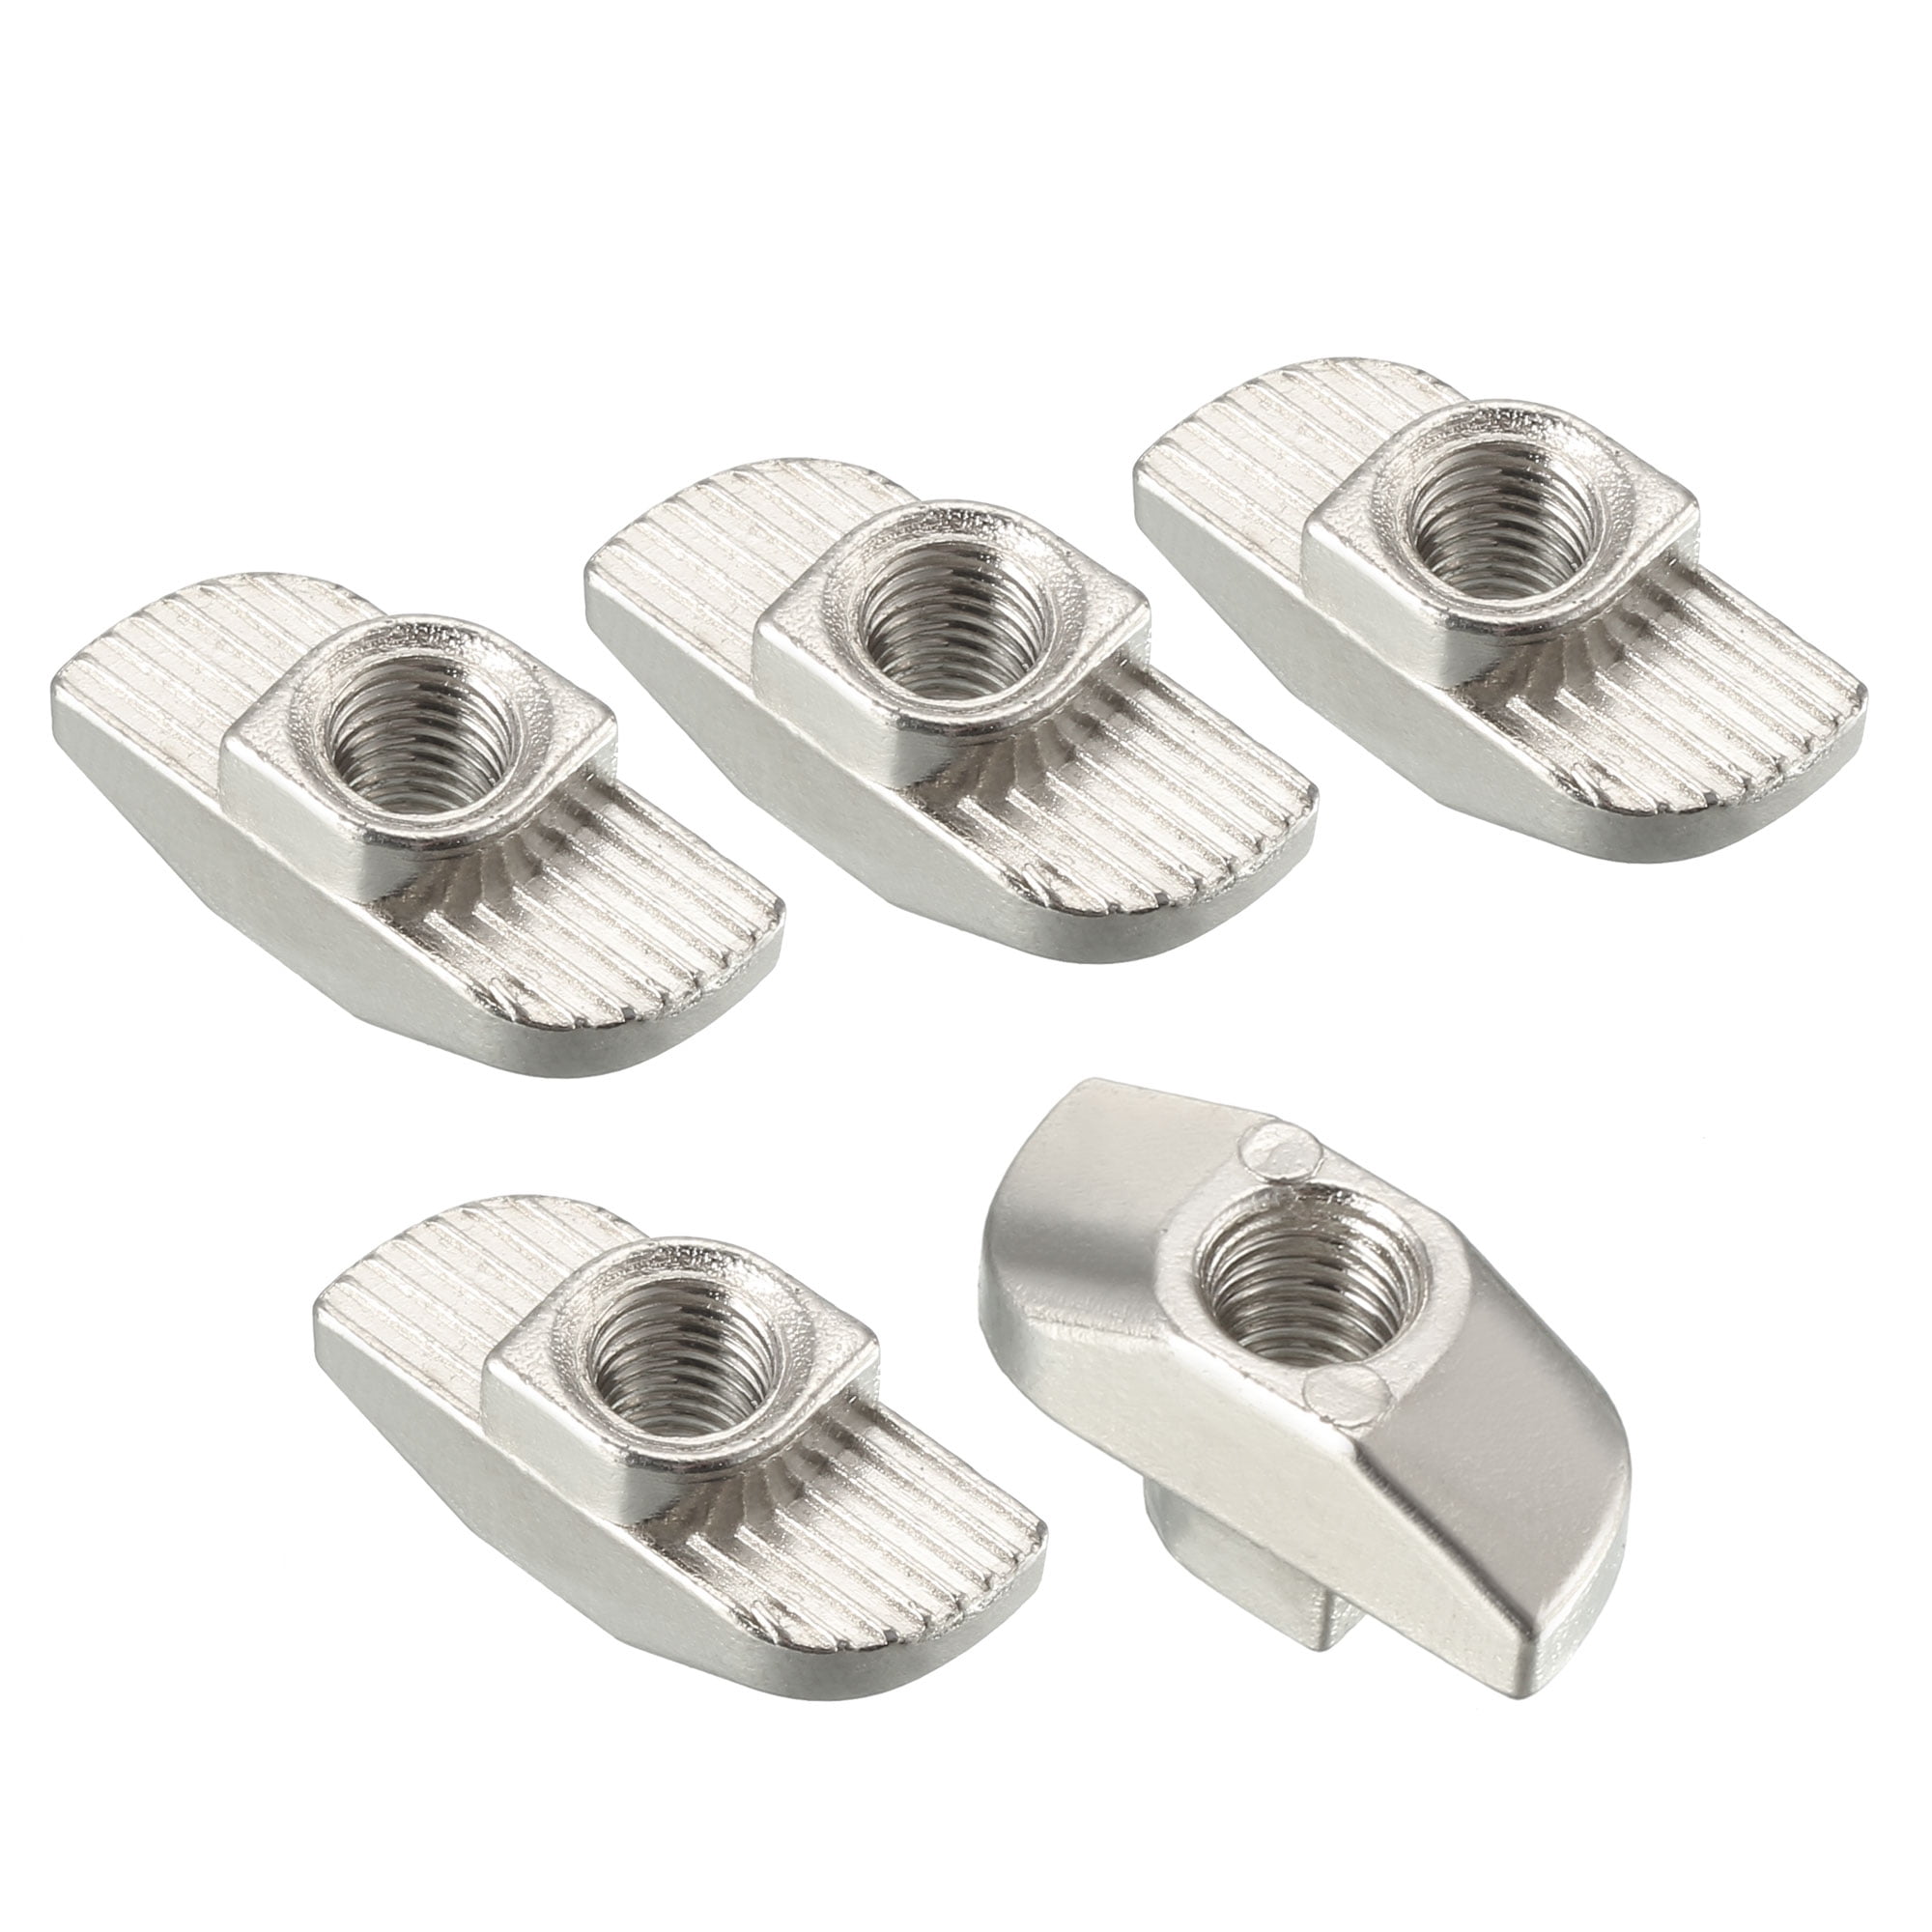 M6 Half Round T-Nut Roll for 4040 Series Aluminum Extrusion Profile Package of 30 Nickel Plated Carbon Steel T-Slot Slot Nuts